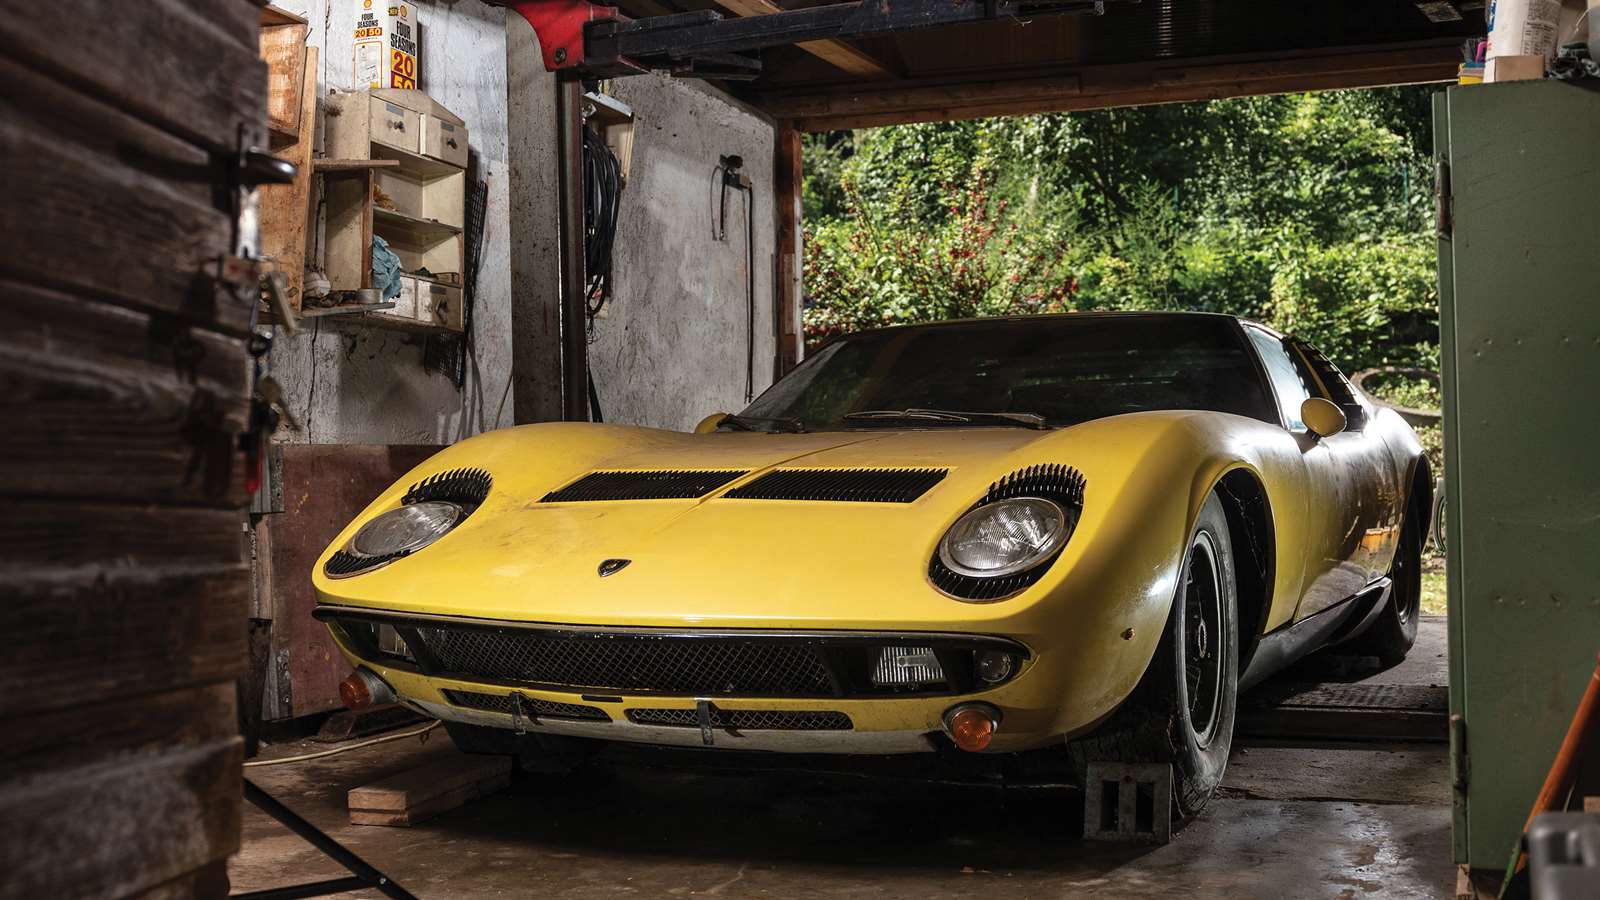 For sale: the £1,000,000 Lamborghini Miura that lived in a shed